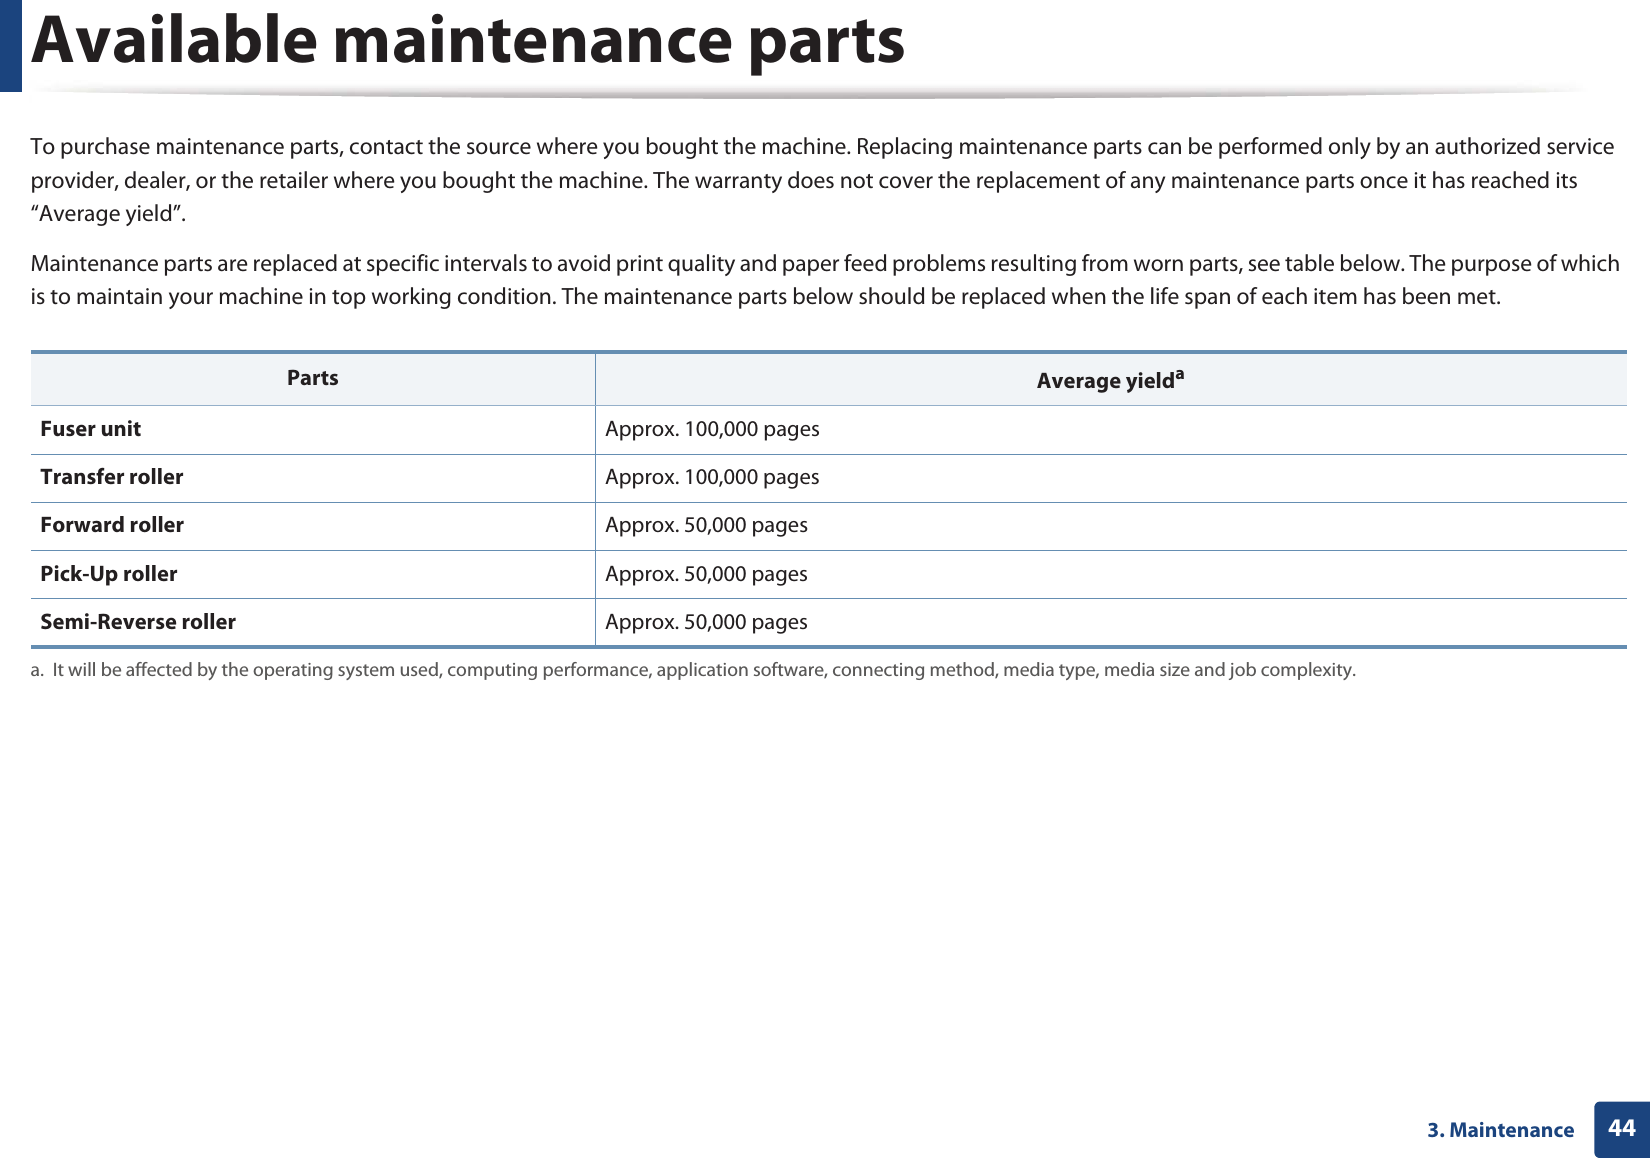 443. MaintenanceAvailable maintenance partsTo purchase maintenance parts, contact the source where you bought the machine. Replacing maintenance parts can be performed only by an authorized service provider, dealer, or the retailer where you bought the machine. The warranty does not cover the replacement of any maintenance parts once it has reached its “Average yield”.Maintenance parts are replaced at specific intervals to avoid print quality and paper feed problems resulting from worn parts, see table below. The purpose of which is to maintain your machine in top working condition. The maintenance parts below should be replaced when the life span of each item has been met.Parts Average yieldaa. It will be affected by the operating system used, computing performance, application software, connecting method, media type, media size and job complexity.Fuser unit Approx. 100,000 pagesTransfer roller Approx. 100,000 pages Forward roller Approx. 50,000 pages Pick-Up roller Approx. 50,000 pagesSemi-Reverse roller Approx. 50,000 pages